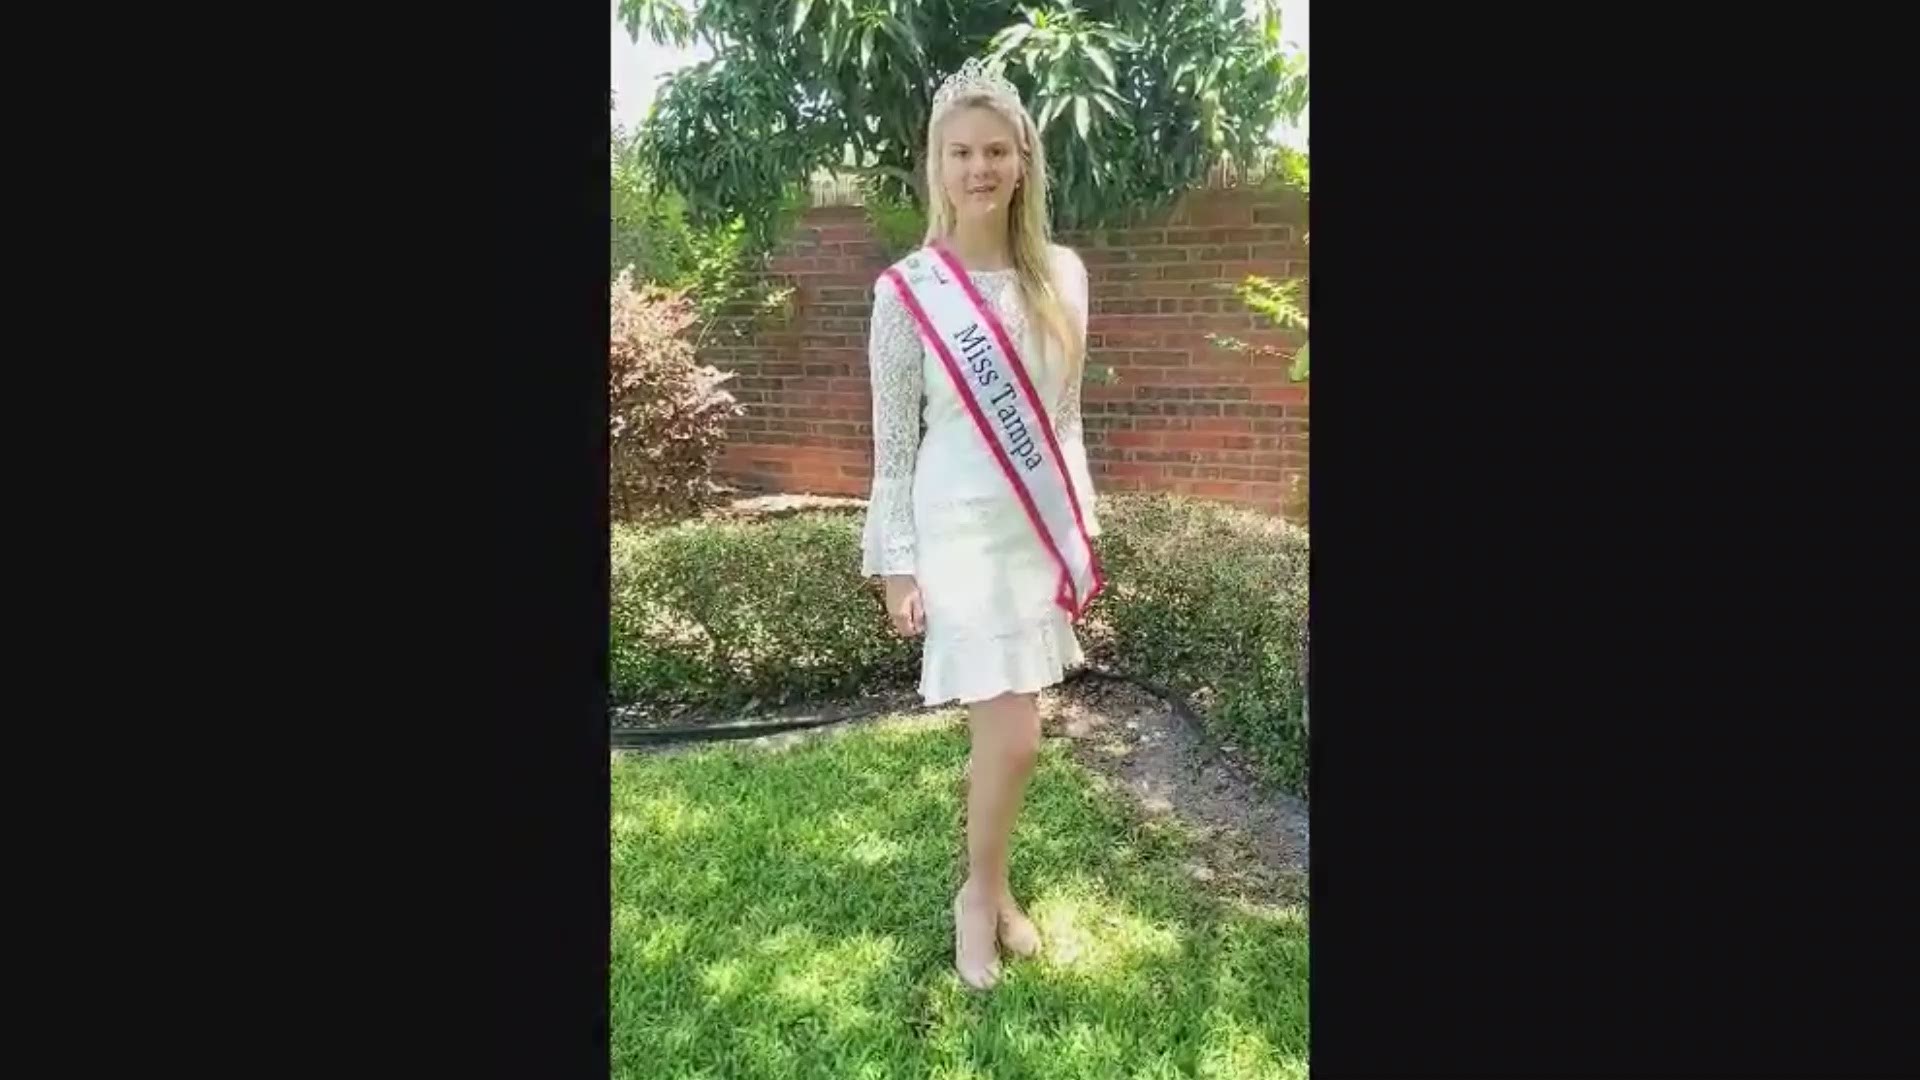 Rachel Barcellona uses pageants to advocate for others with autism.